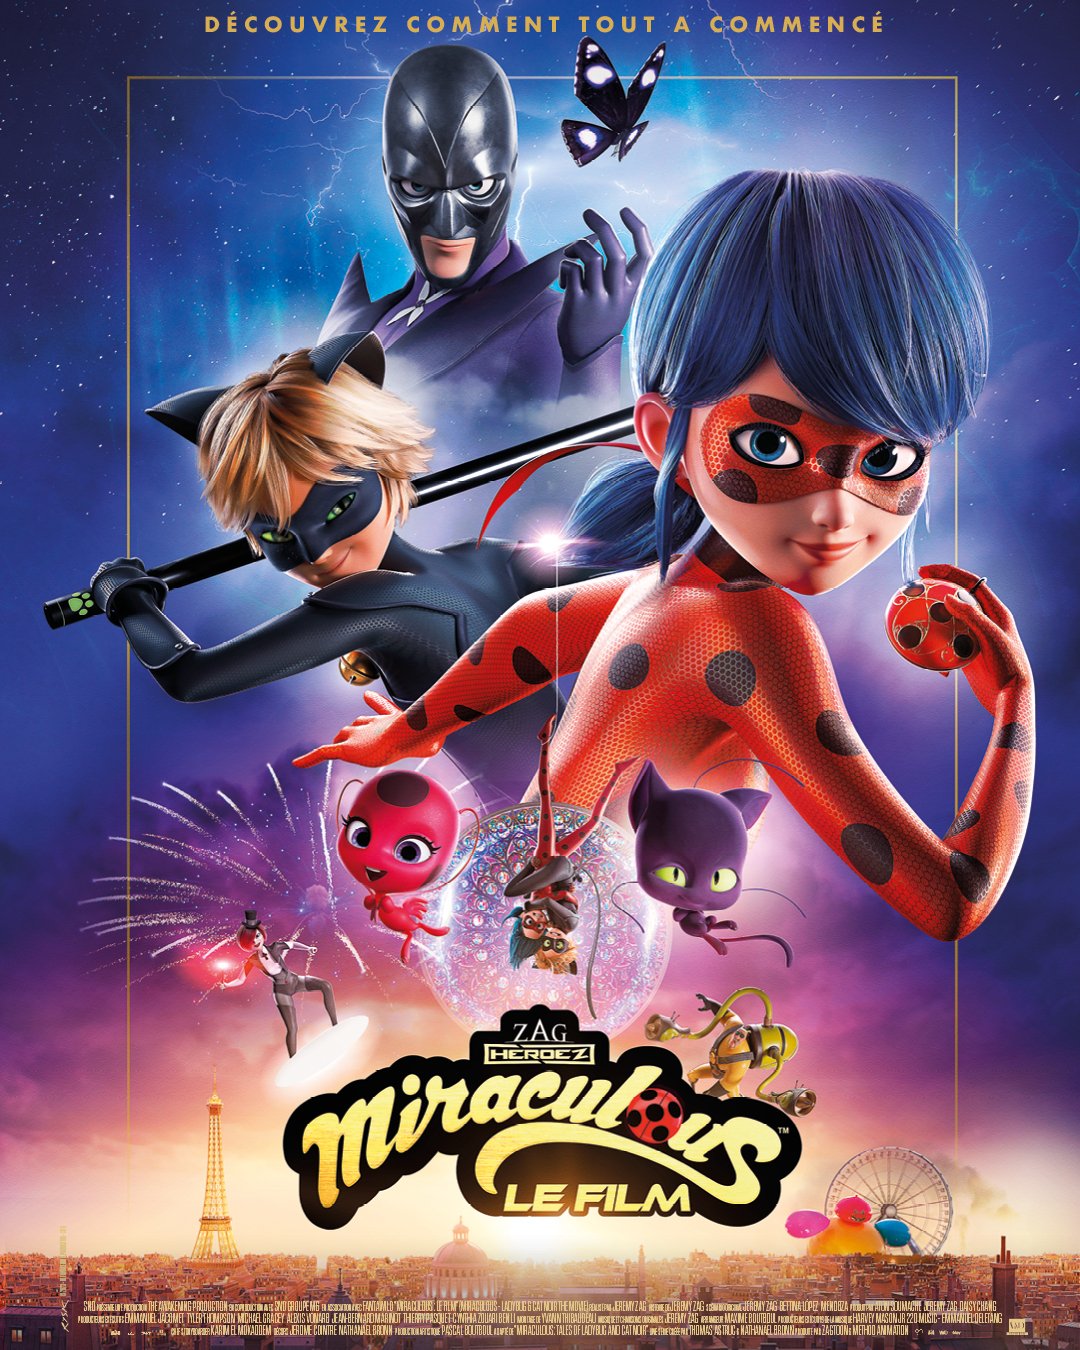 Miraculous Ladybug and Cat Noir Awakening movie pictures, images, art,  posters, trailers and screen shots 